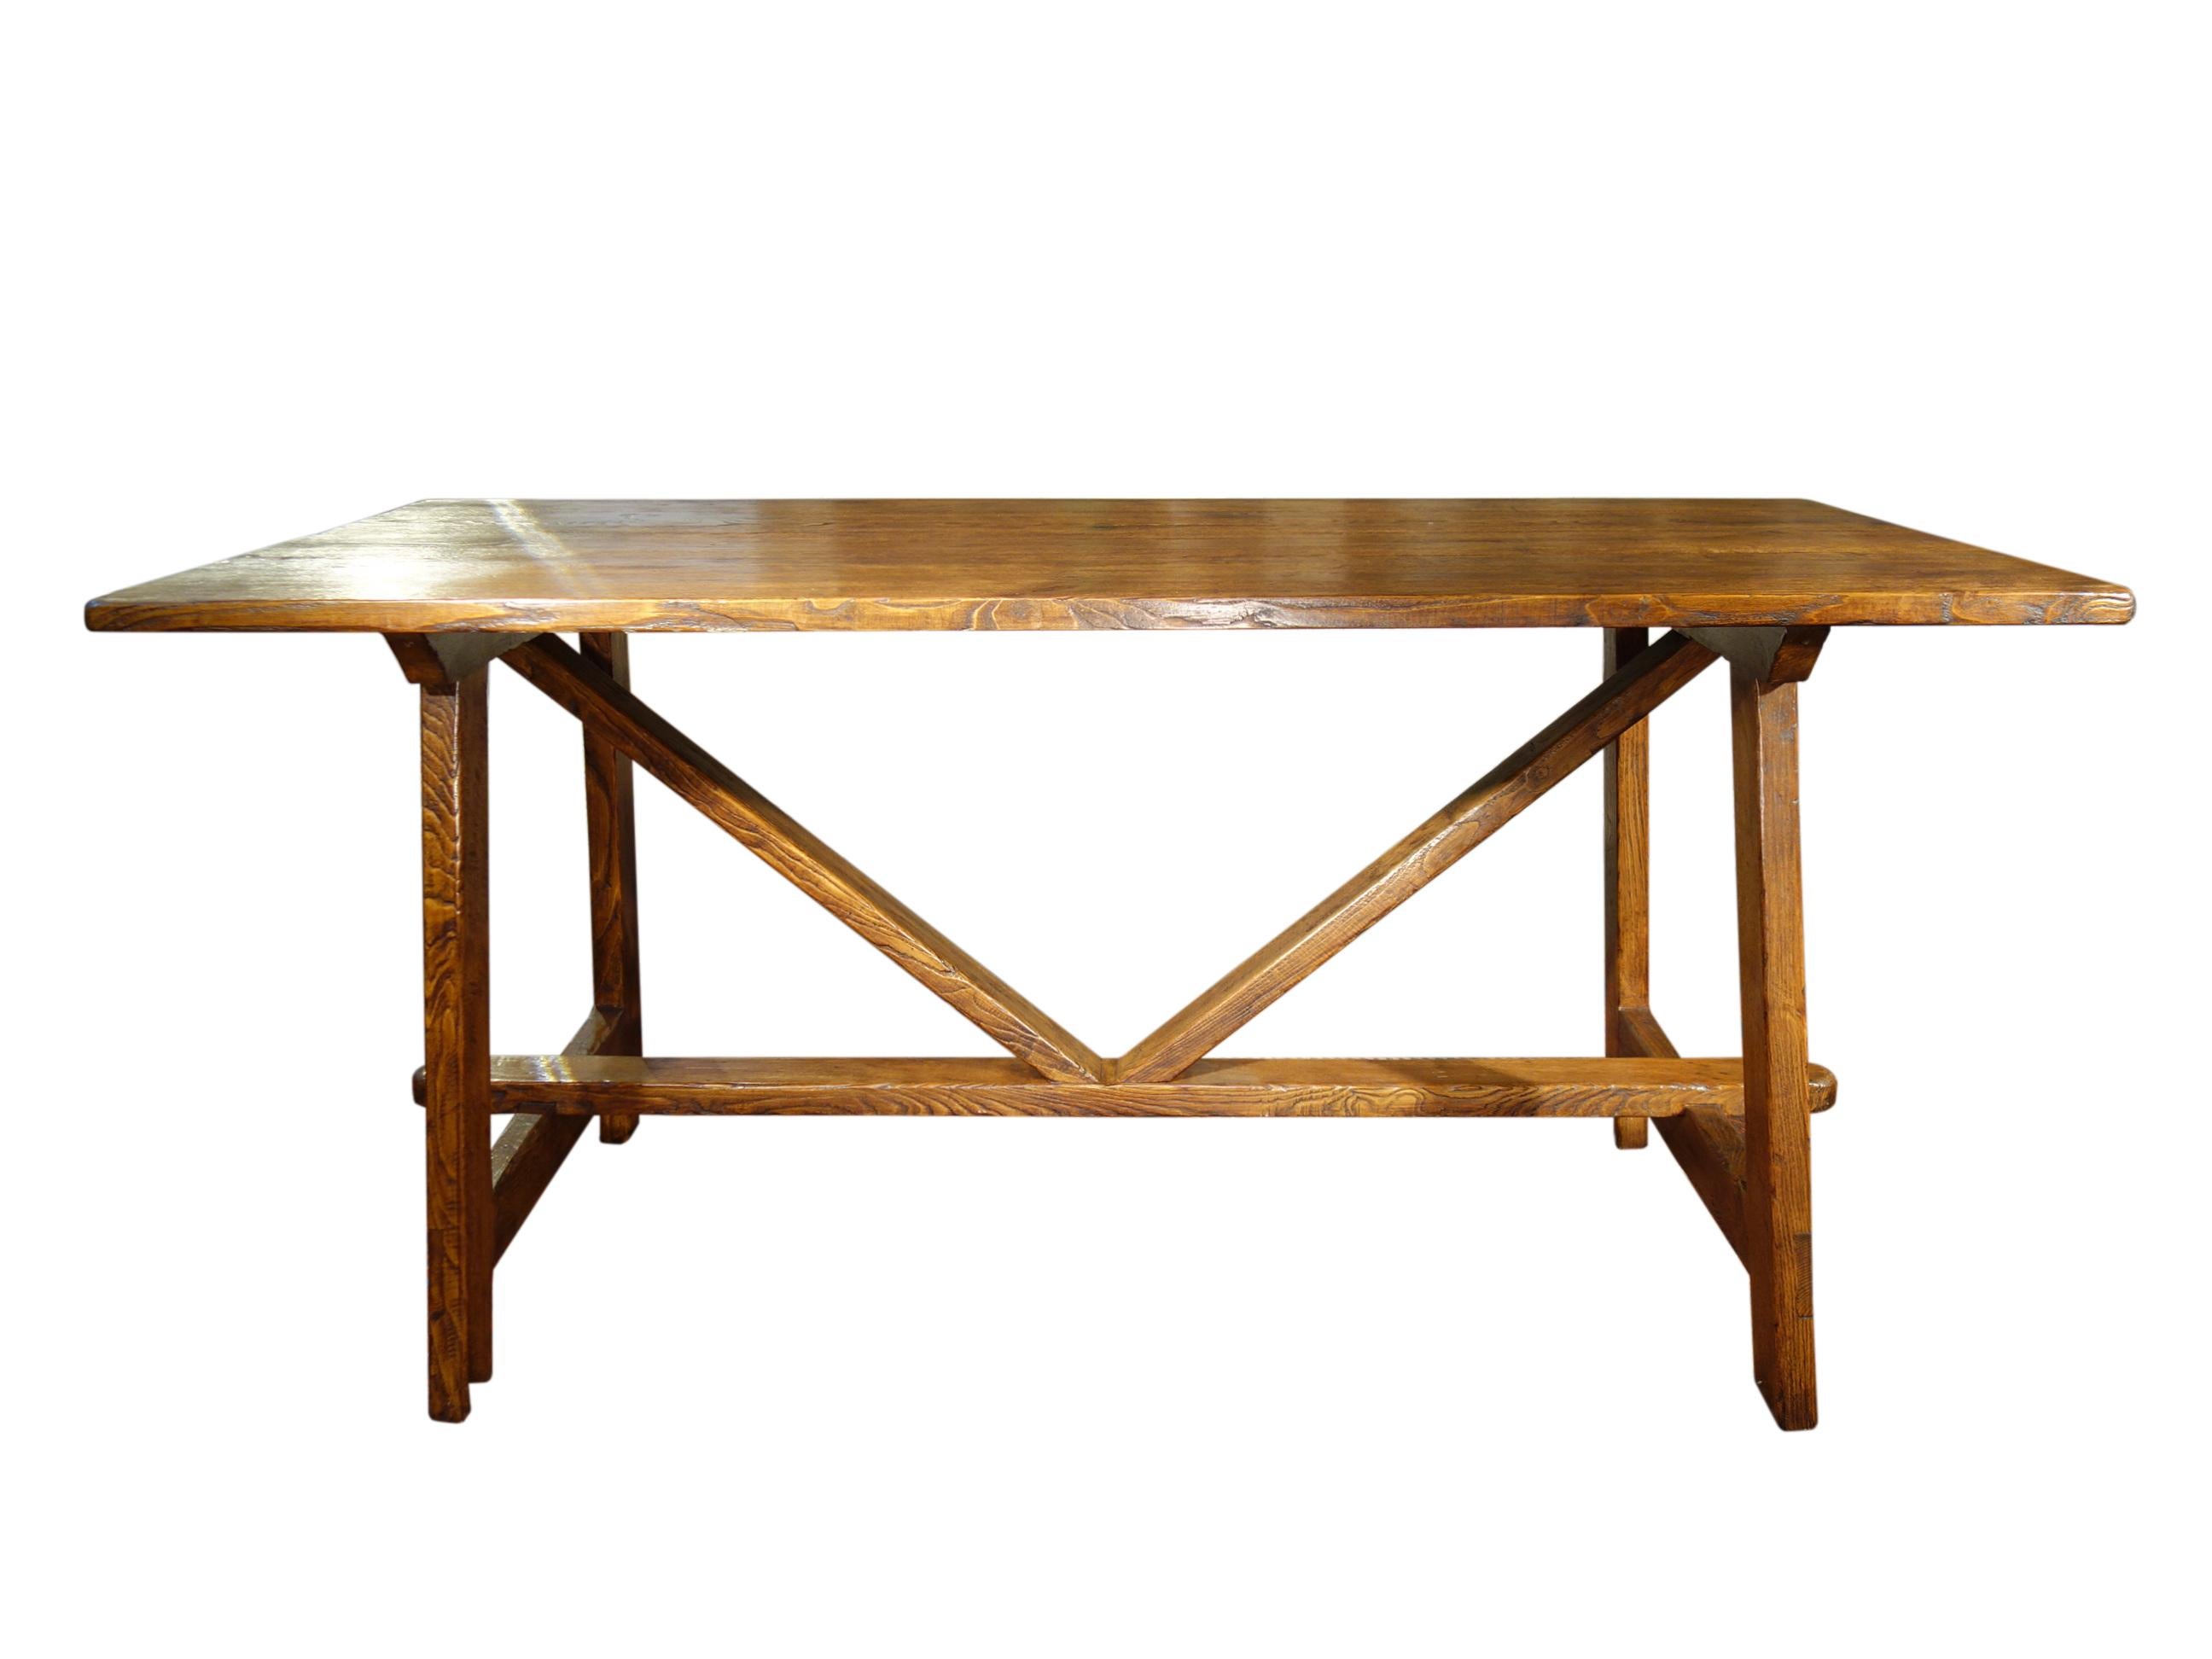 17th C Italian Refectory Style Solid Chestnut CAPRETTA Table with dining options For Sale 4